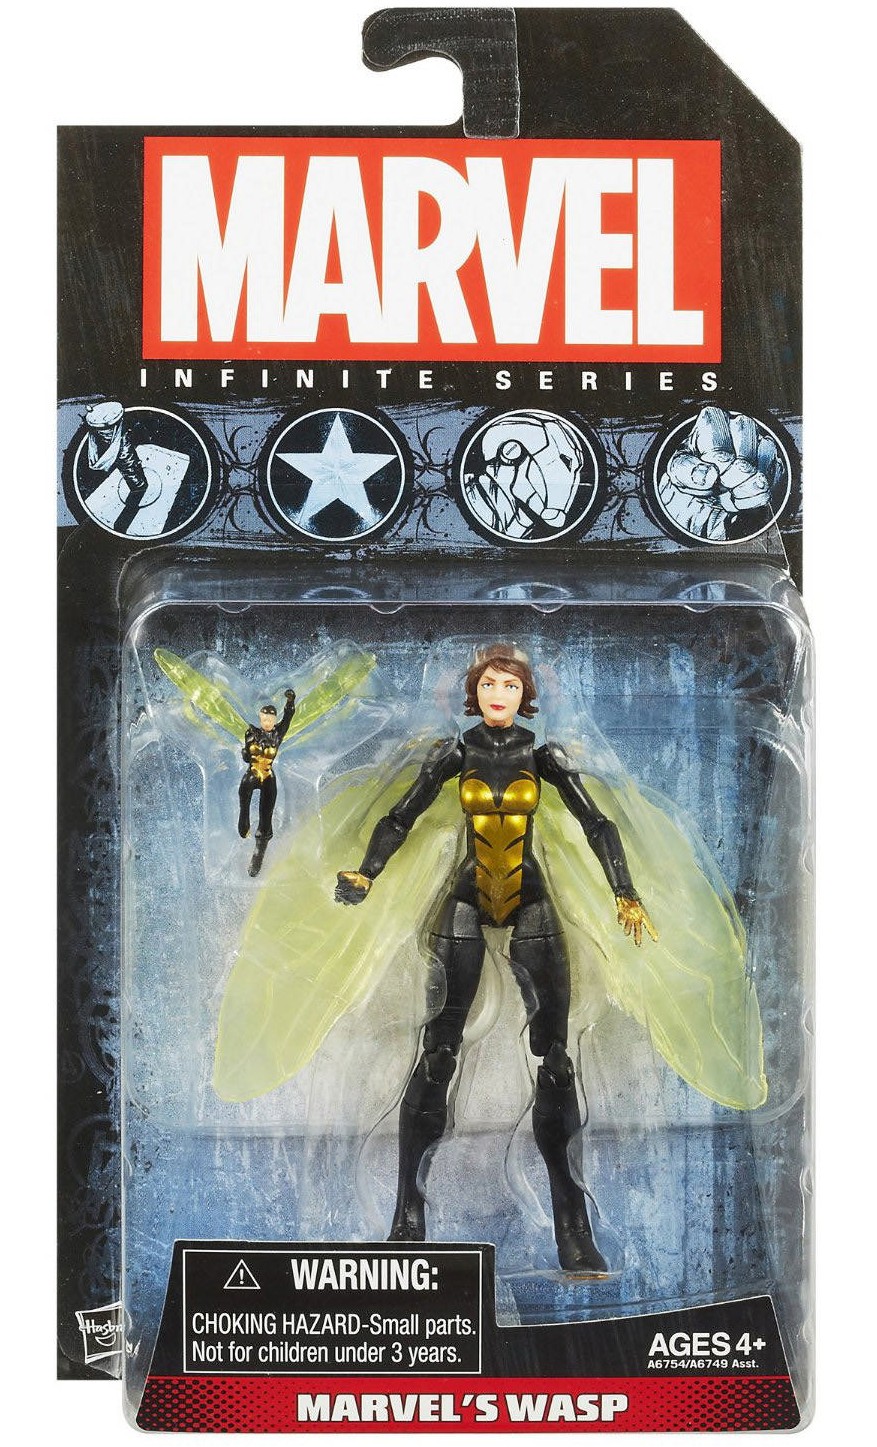 Marvel Legends Series Marvel's WASP- New in Box Ship Shelf Wear Free Pad Env 